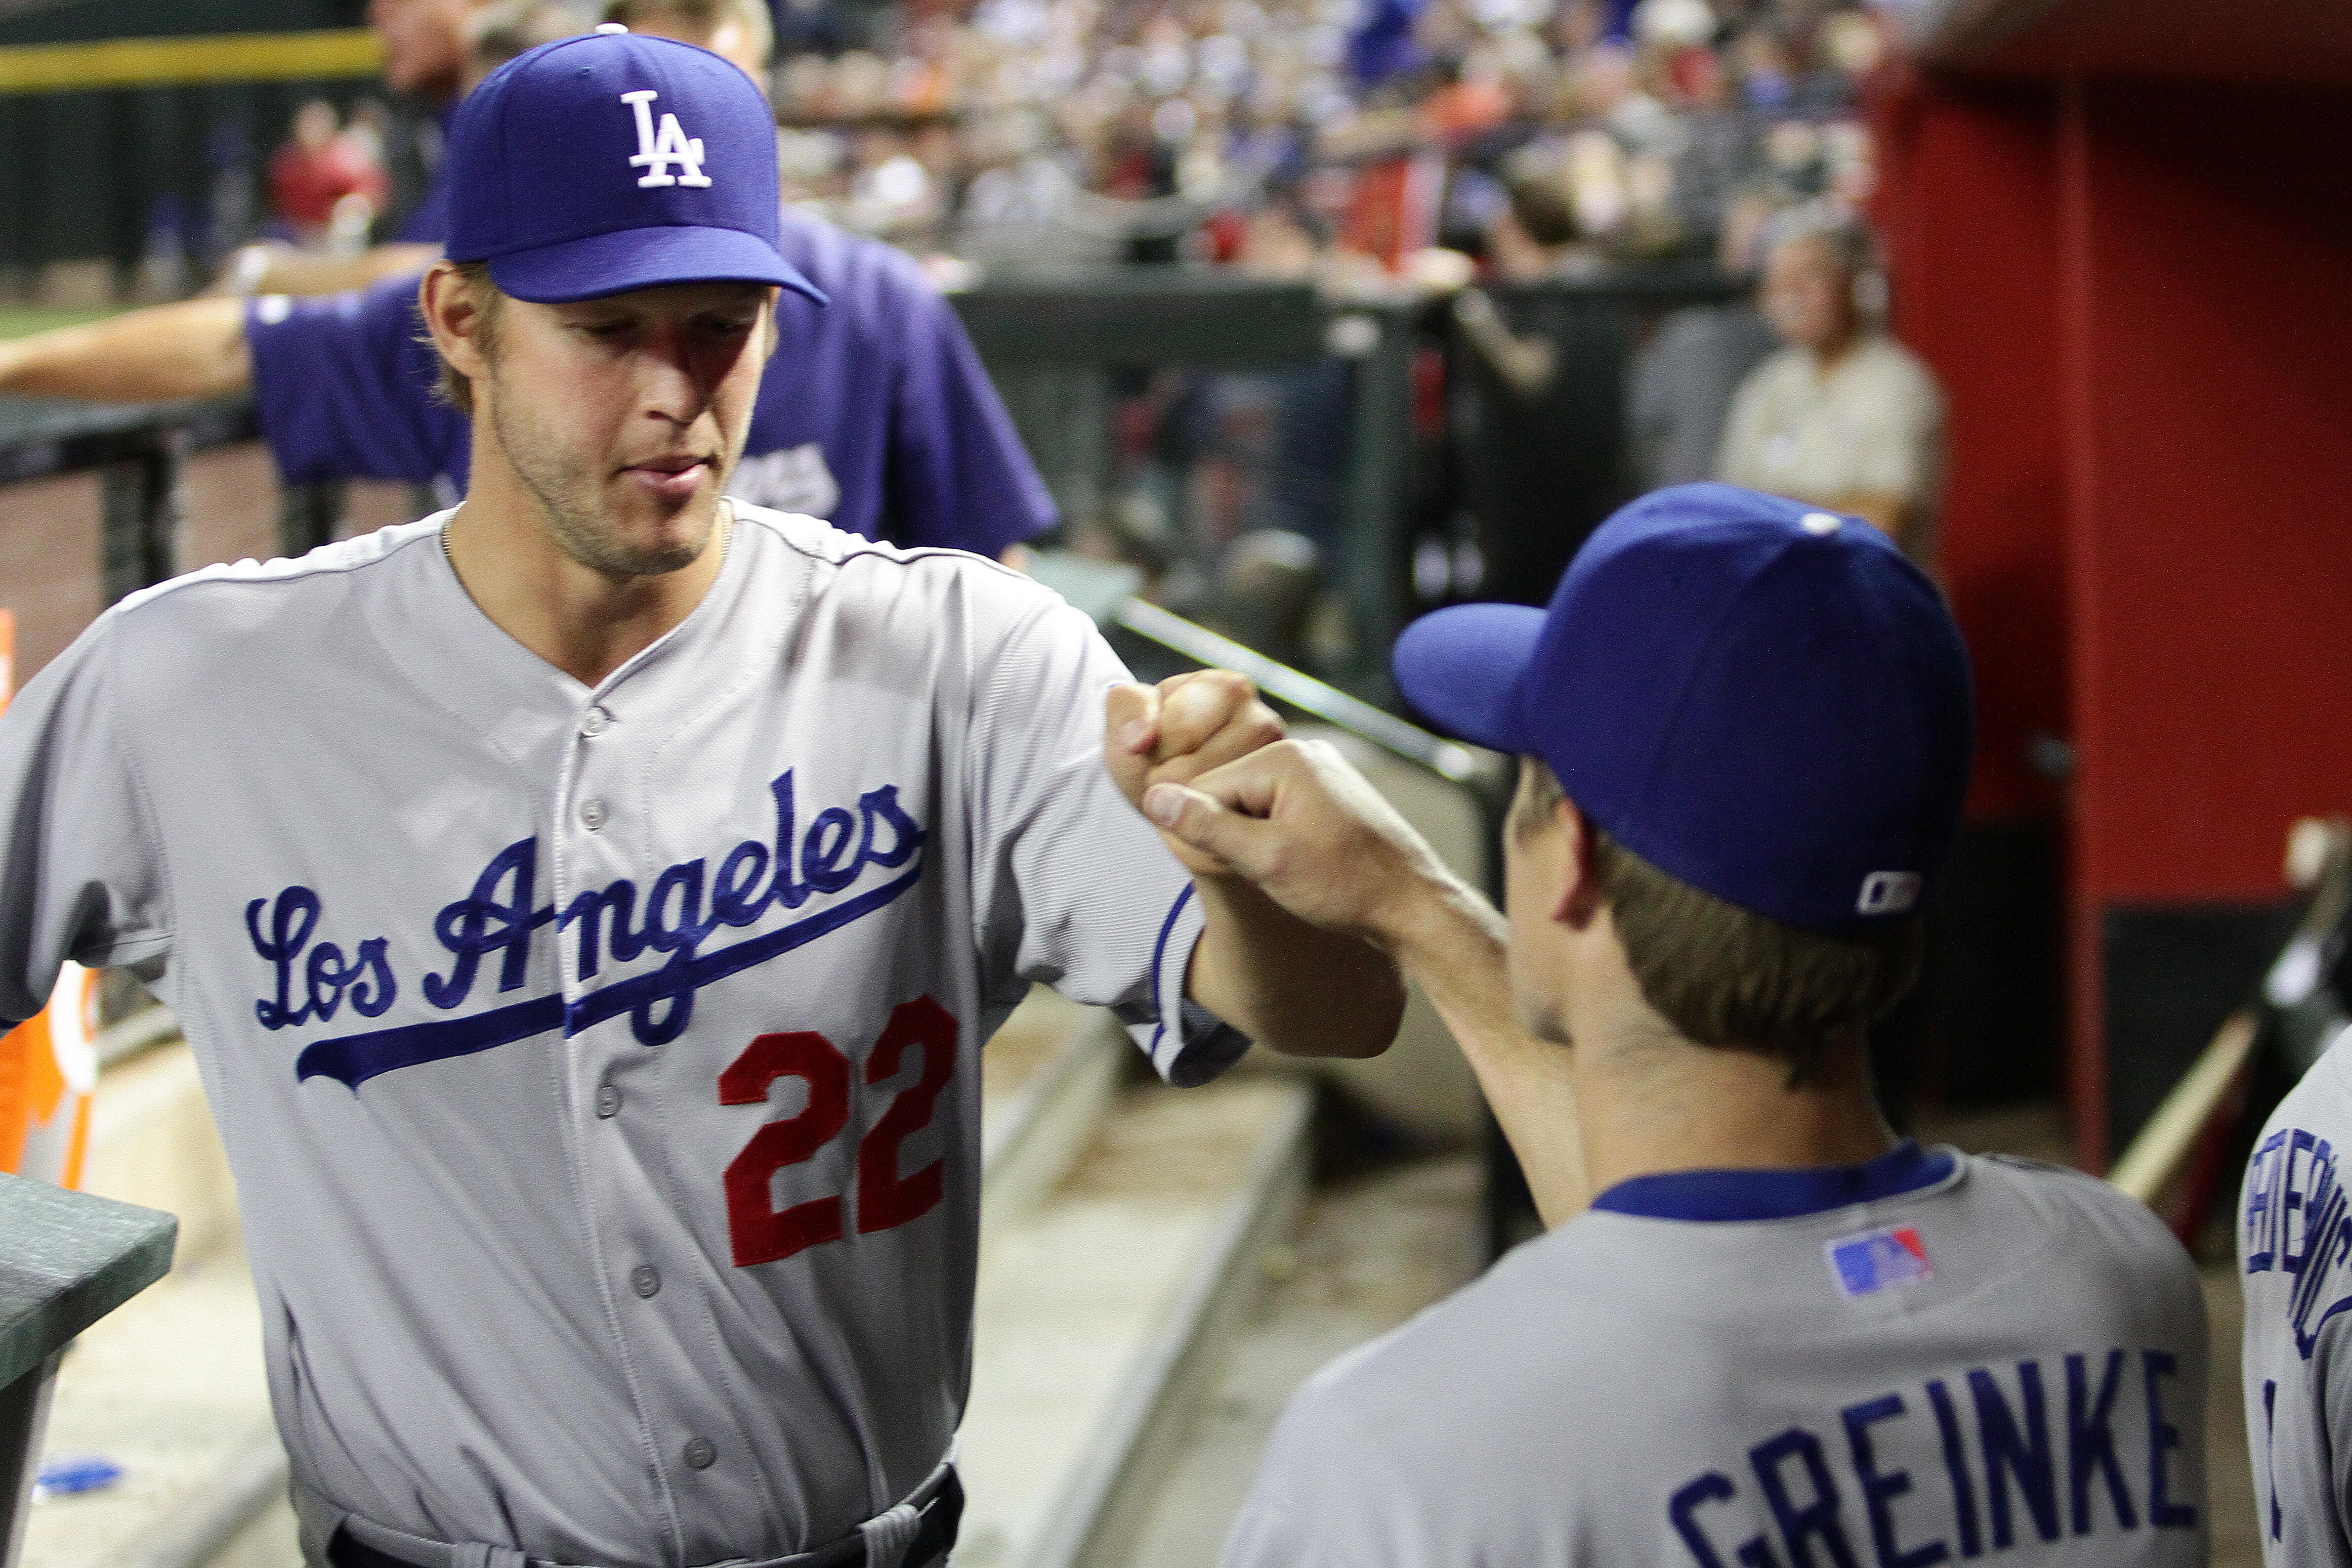 PHOENIX, AZ - APRIL 12:  Clayton Kershaw #22 and Zach Greinke #21 of the Los Angeles Dodgers fist bump in the sixth inning against the Arizona Diamondbacks at Chase Field on April 12, 2014 in Phoenix, Arizona.  (Photo by Jason Wise/Getty Images)